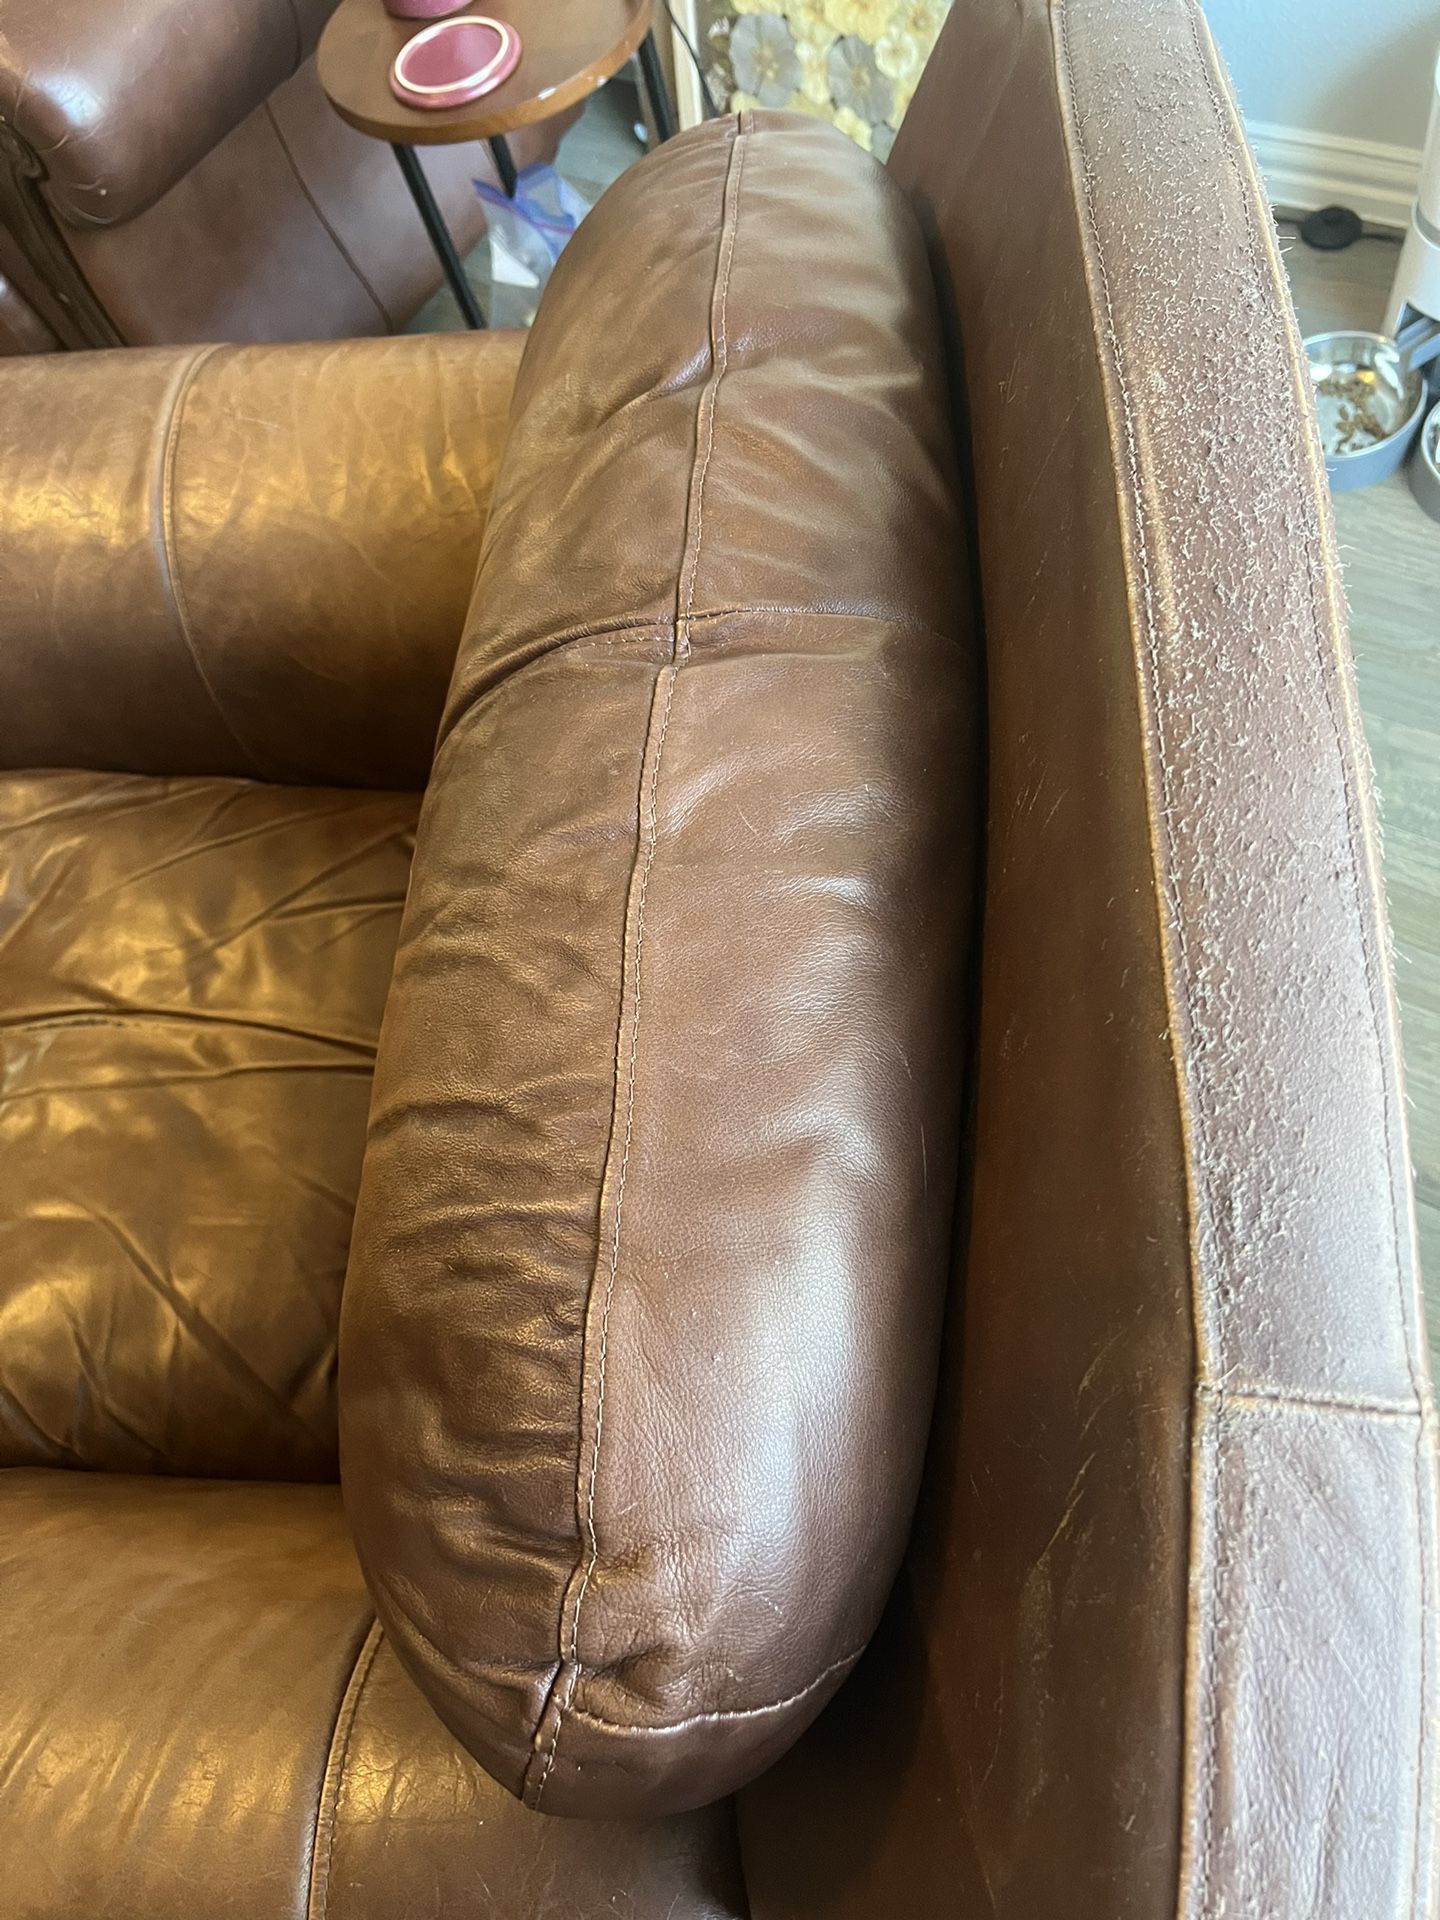 couch set NEED GONE